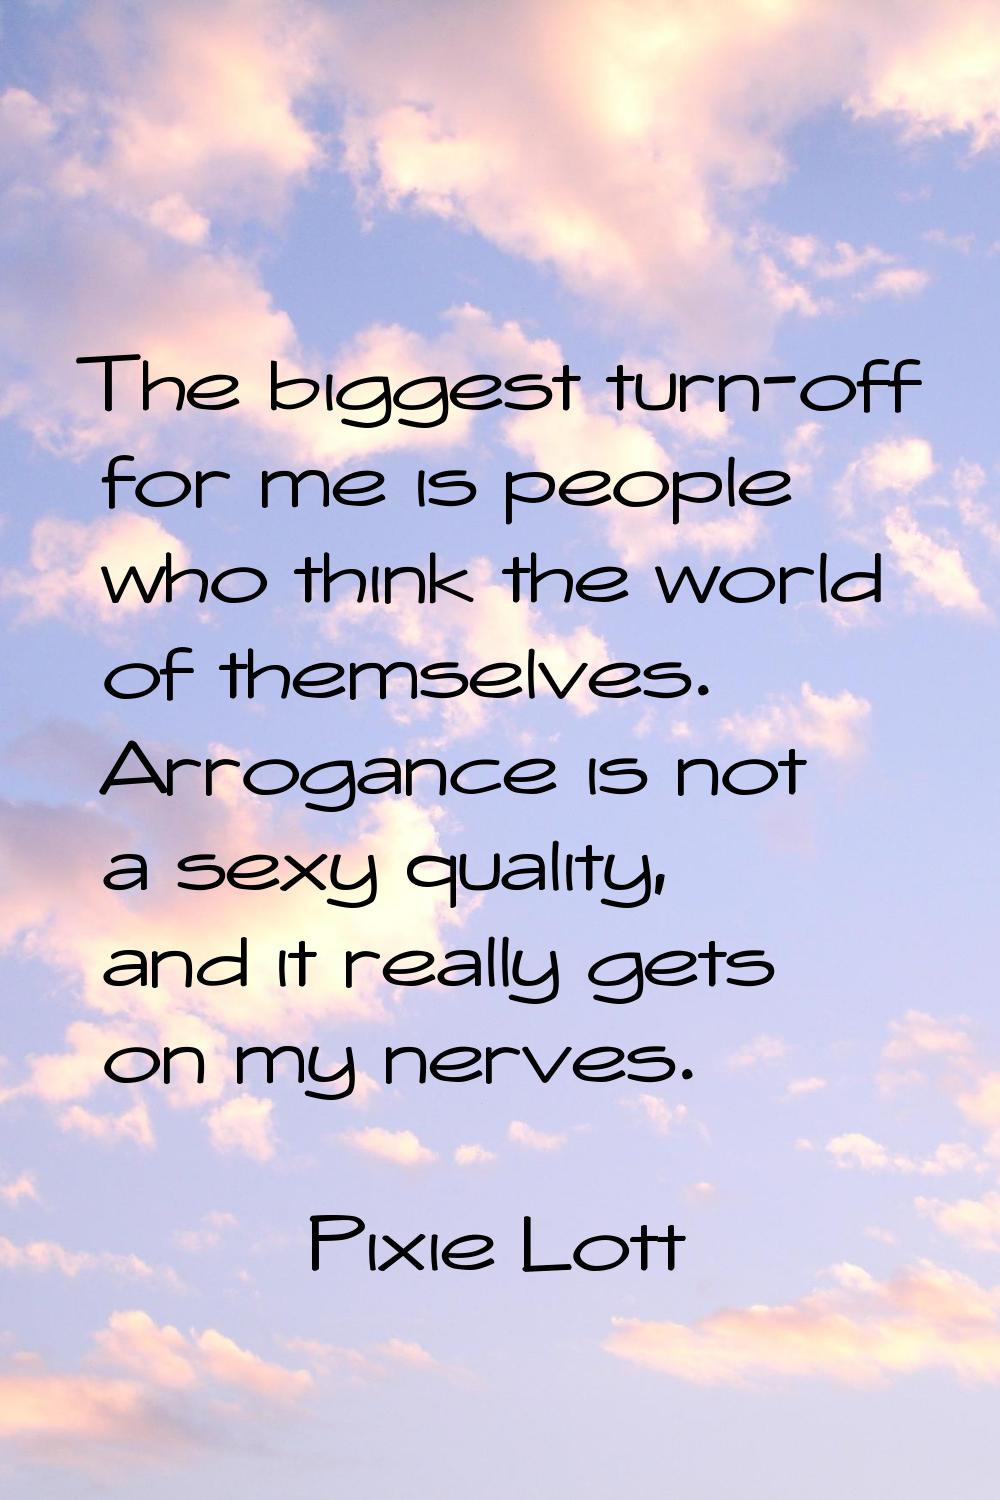 The biggest turn-off for me is people who think the world of themselves. Arrogance is not a sexy qu